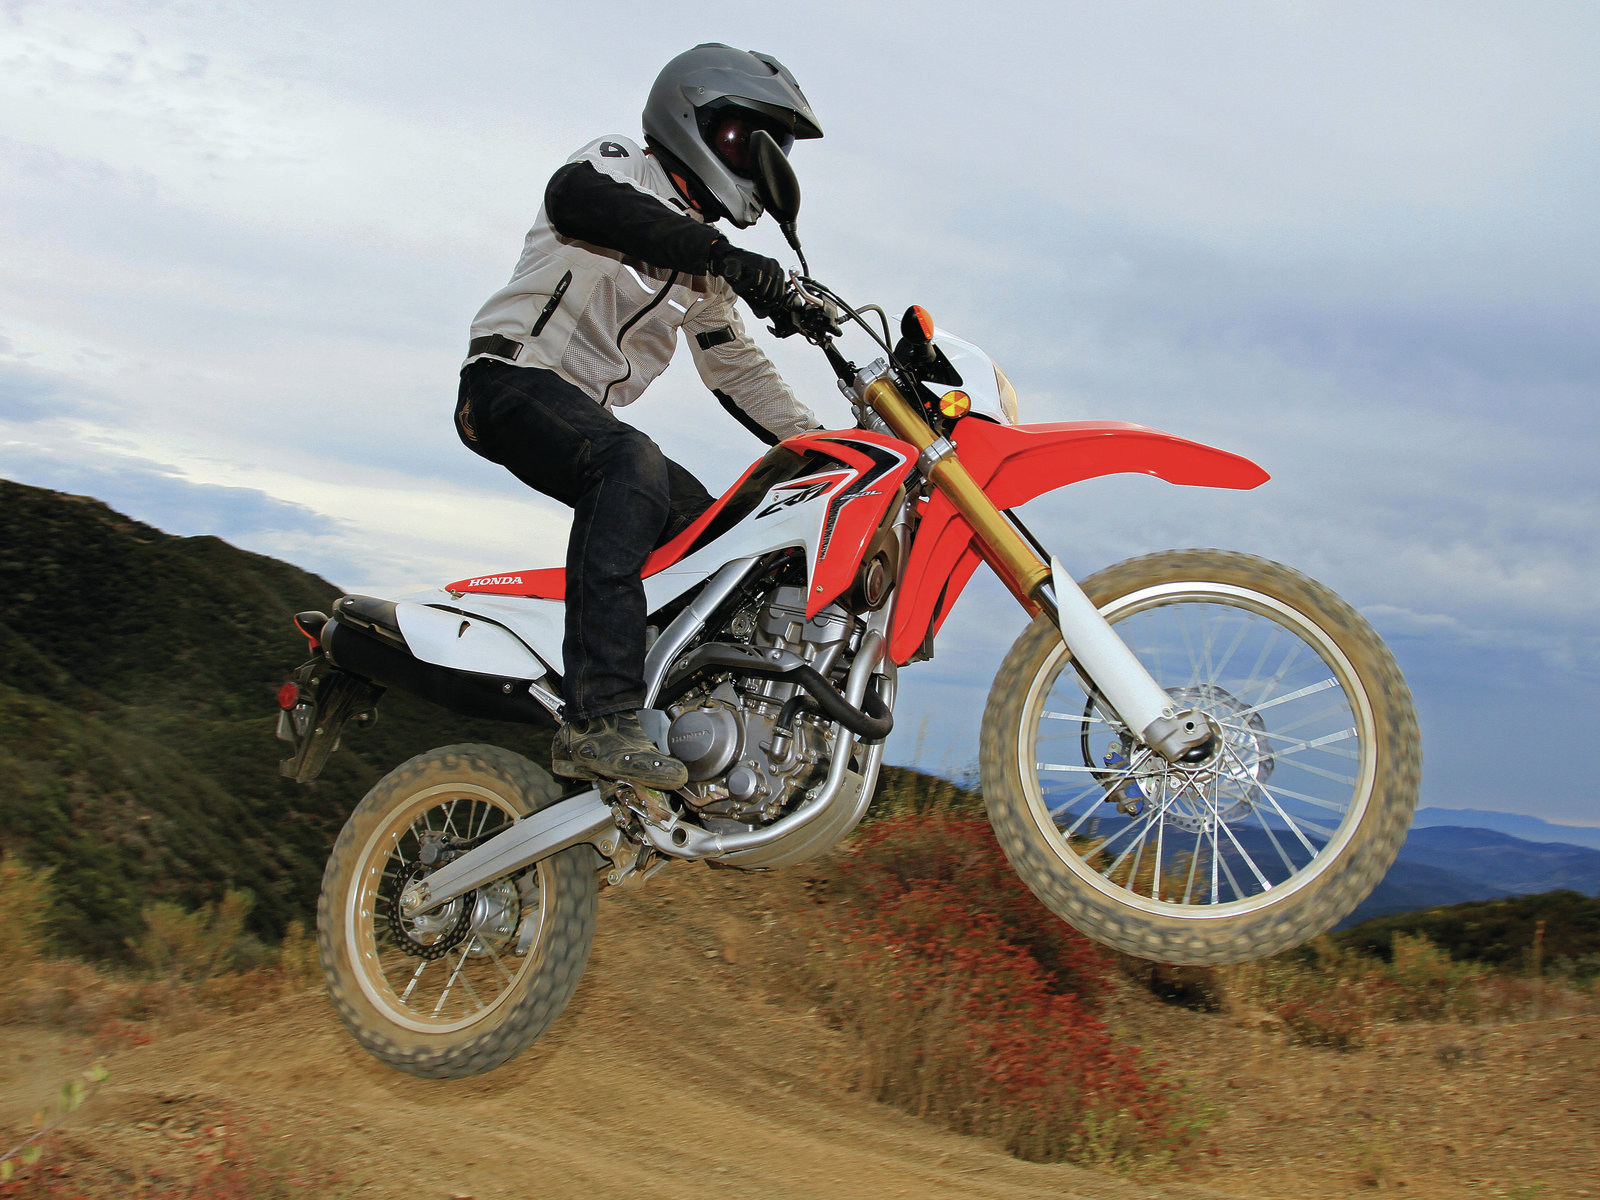 Incredible motorcycle Honda CRF 250 L wallpapers and images